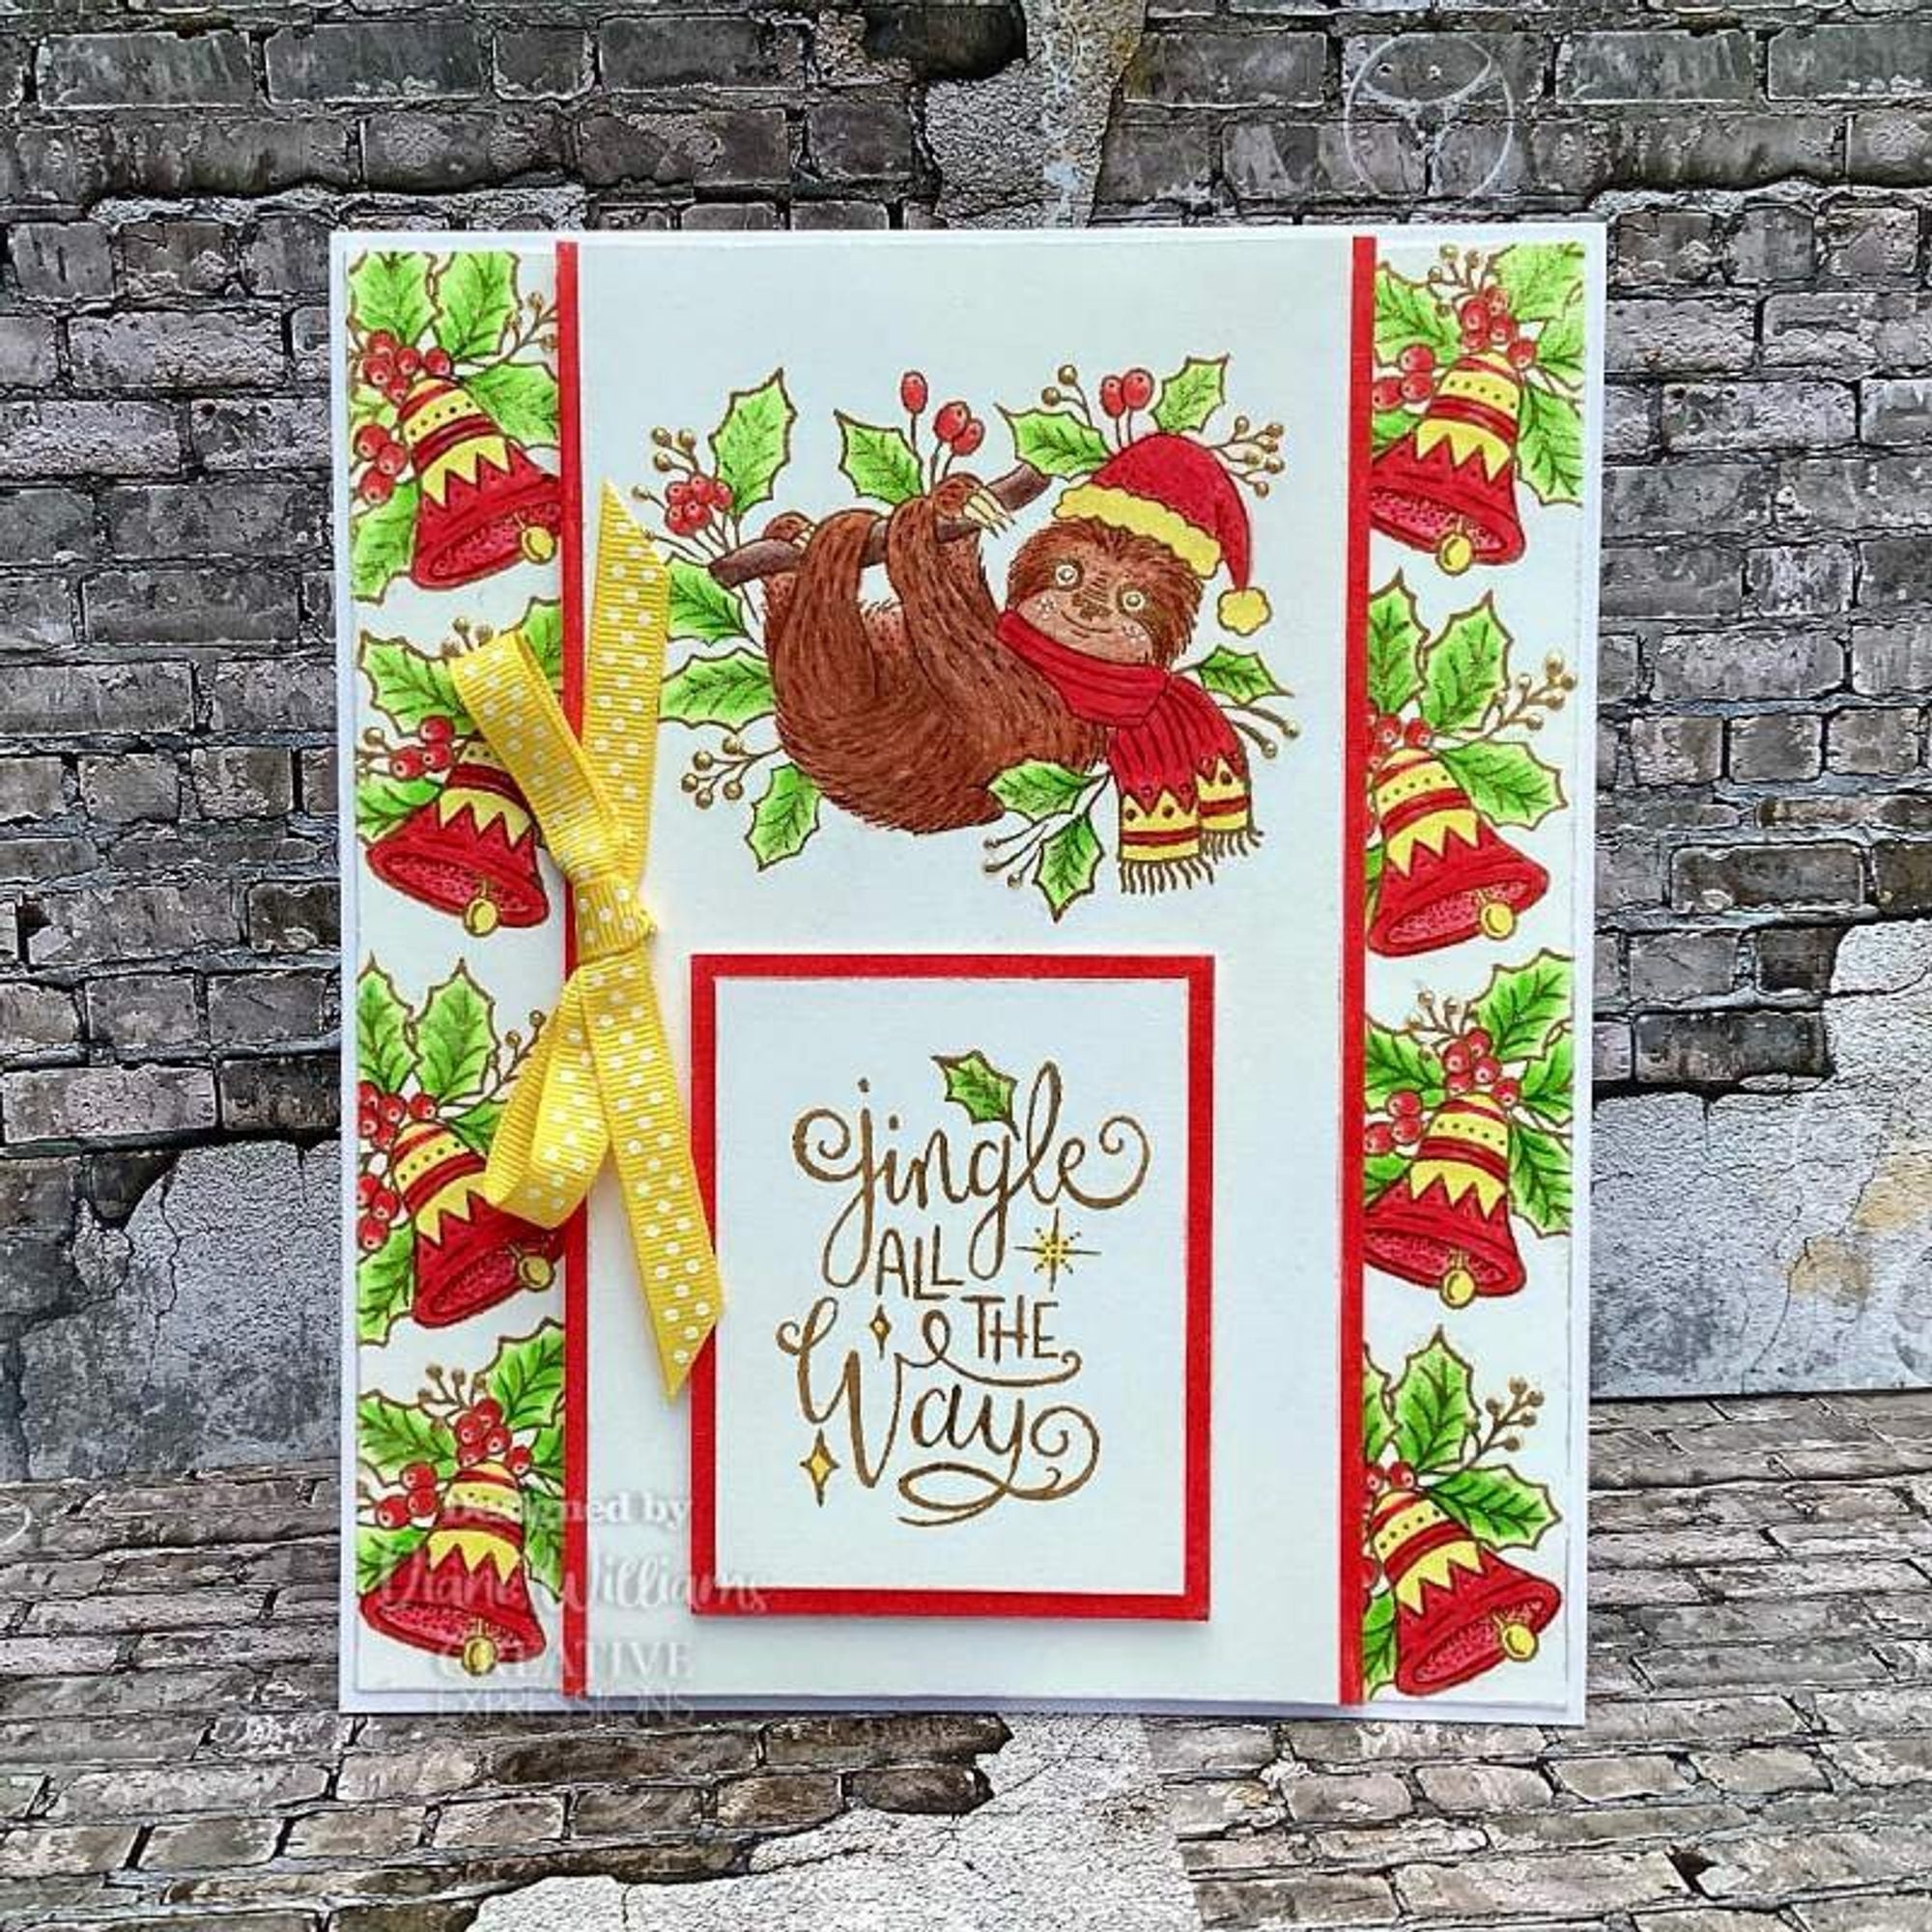 Creative Expressions Designer Boutique Jingle All The Way 6 in x 4 in Clear Stamp Set